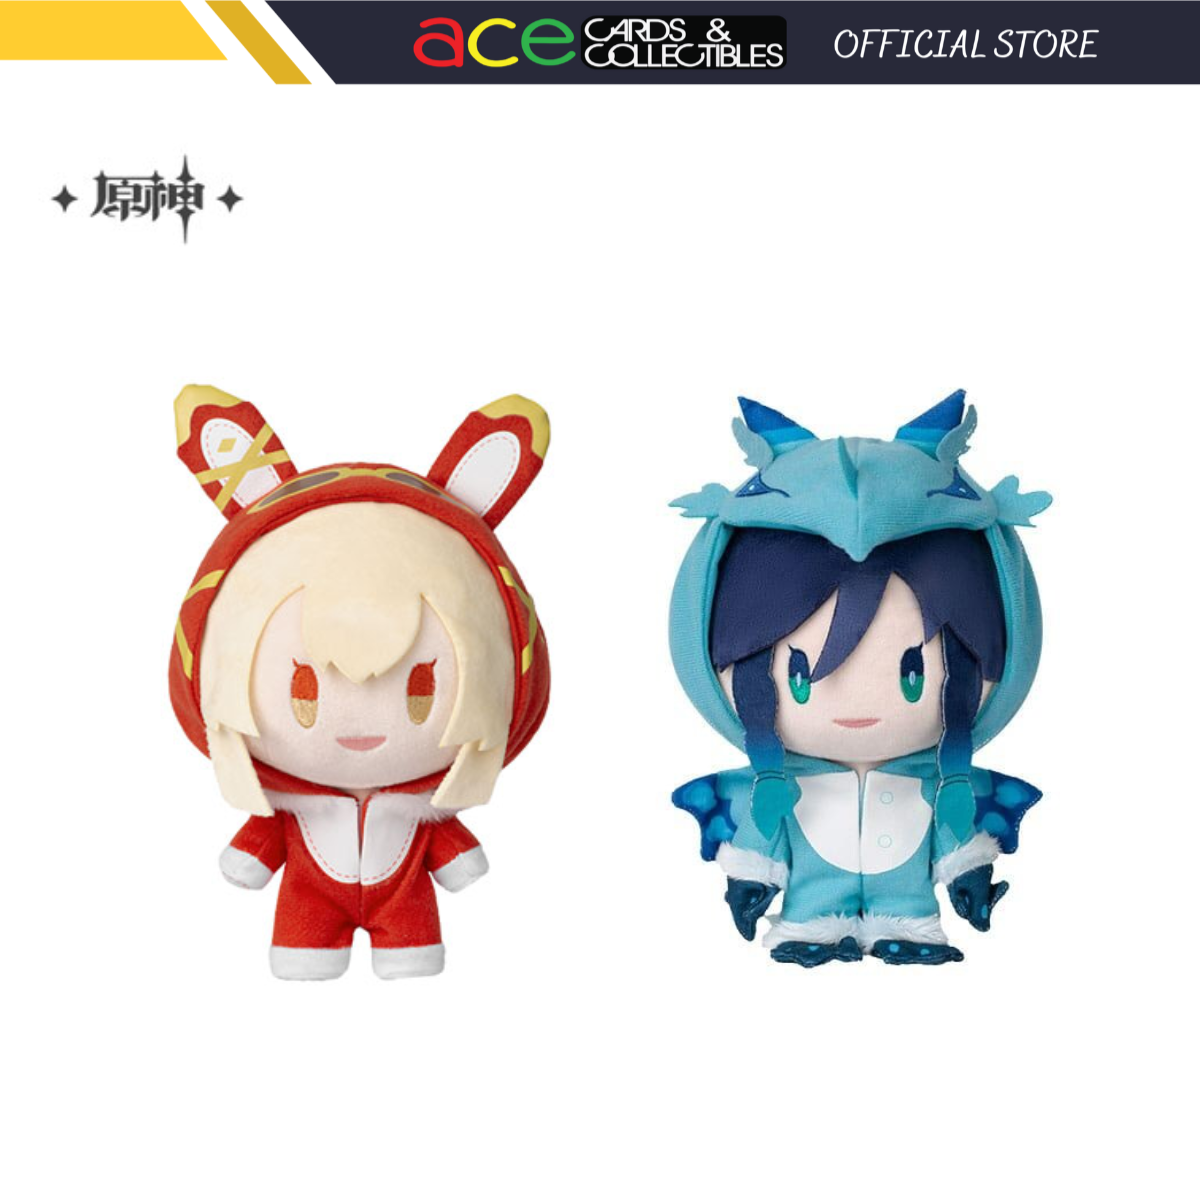 miHoYo Genshin Impact Teyvat Paradise Character Mondstadt Plush Series-Klee-miHoYo-Ace Cards & Collectibles